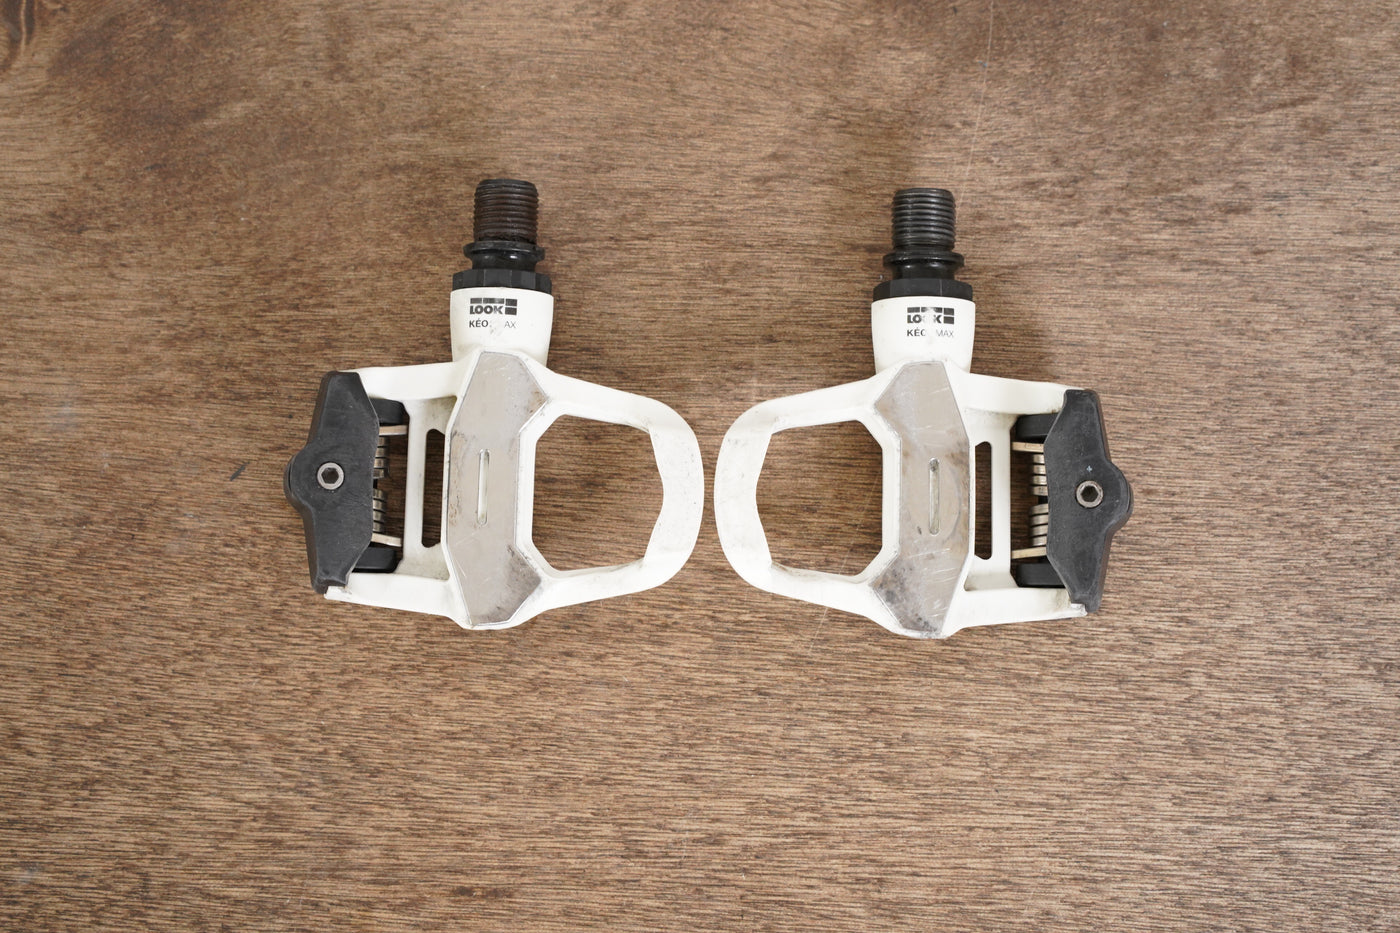 LOOK Keo 2 MAX Composite Road Clipless Pedals 259g